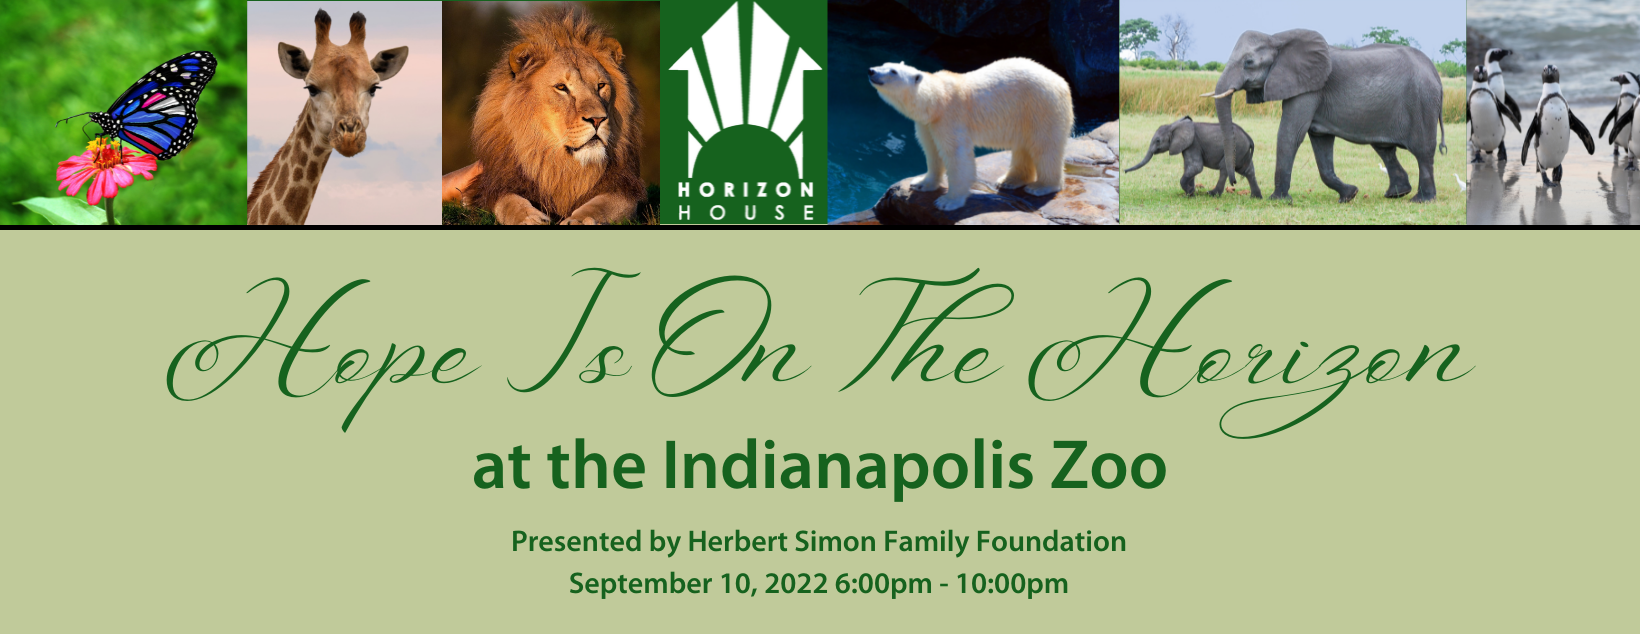 Hope is on the Horizon at the Indianapolis Zoo